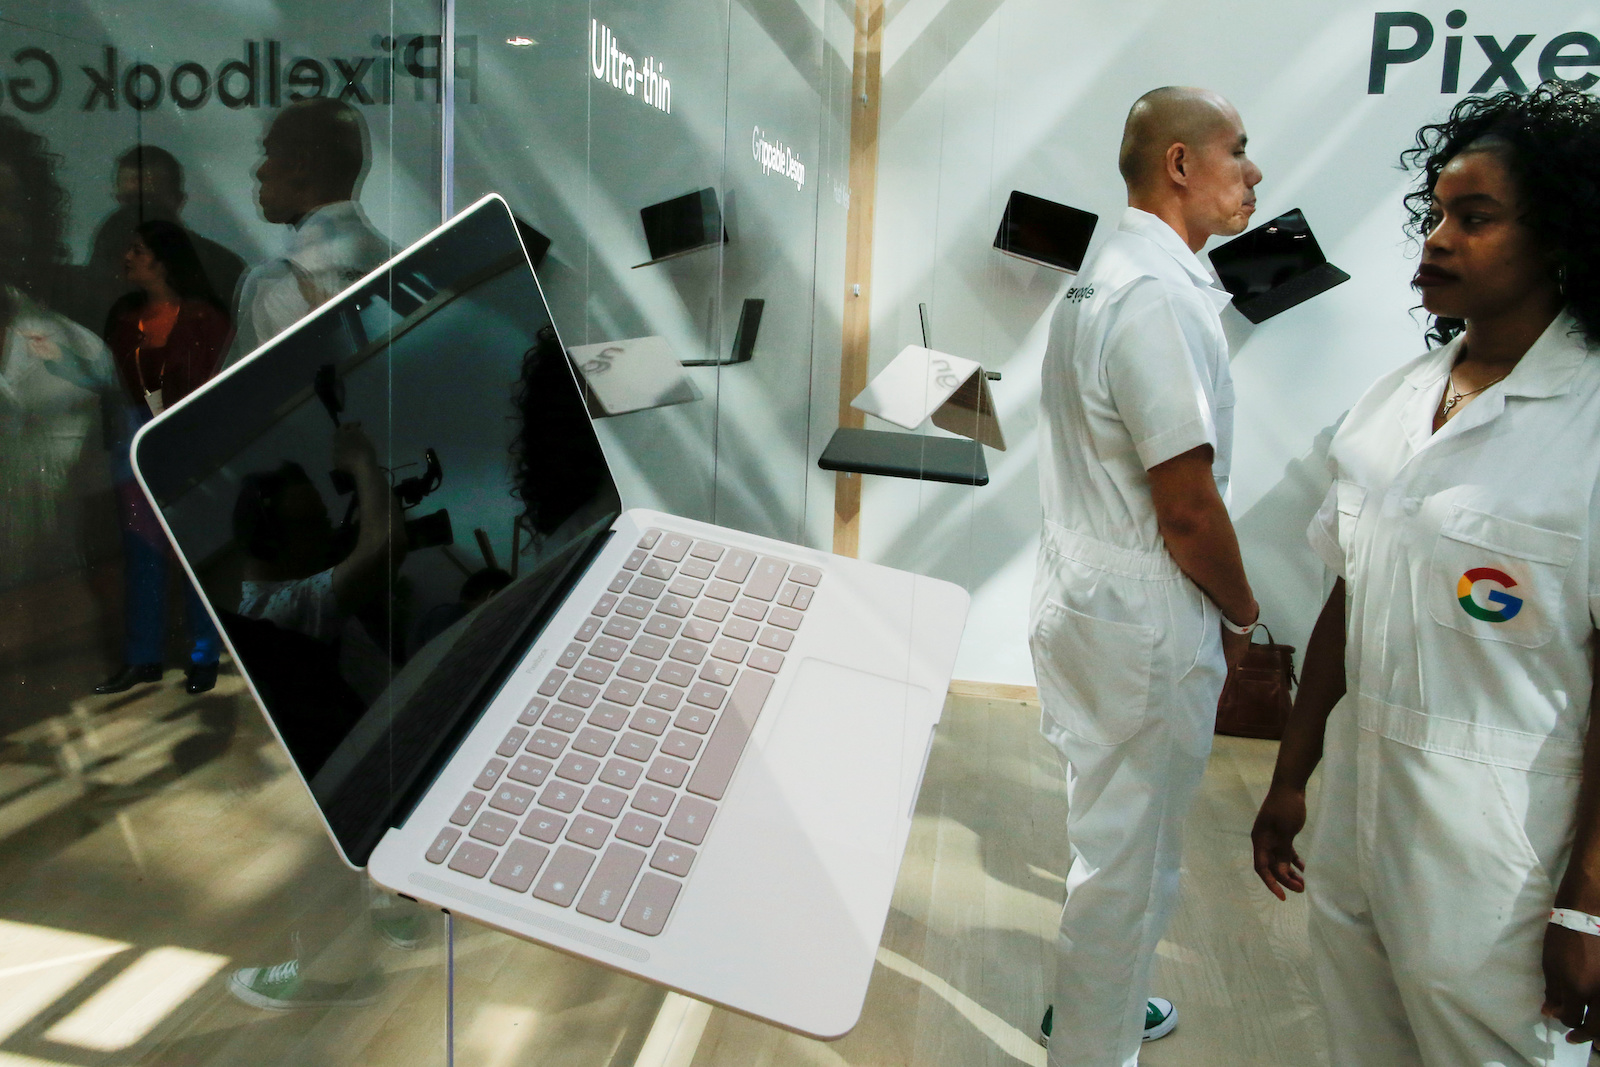 The new Google Pixelbook Go laptop is displayed during a Google launch event in New York City, New York, U.S., October 15, 2019. REUTERS/Eduardo Munoz